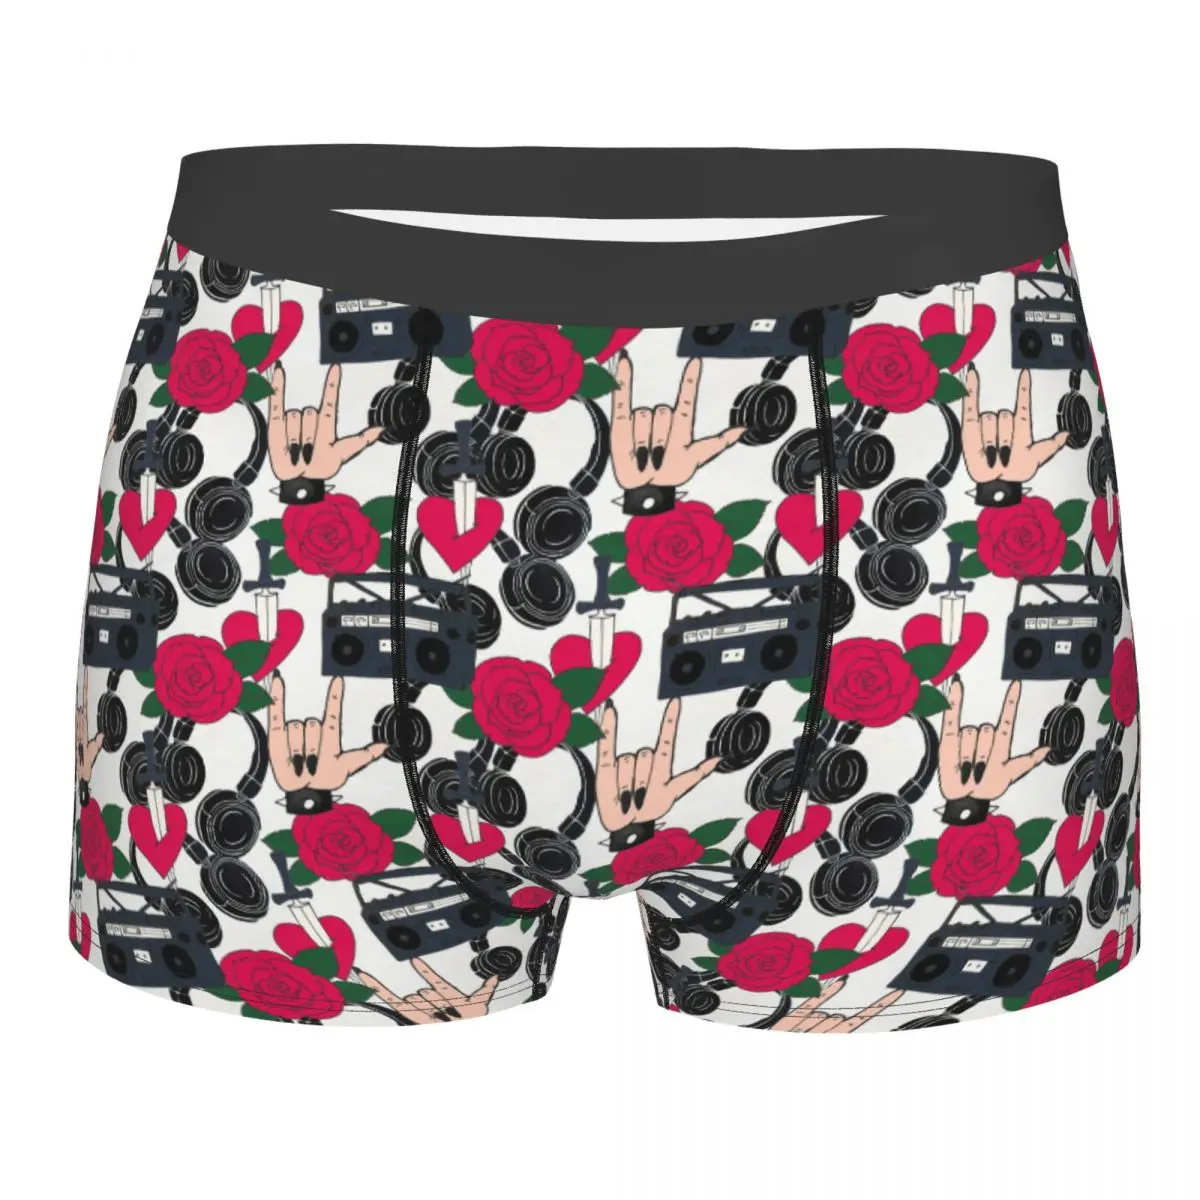 

Rock Hand Roses Heart Tattoo Men Underwear Boxer Briefs Shorts Panties Hot Polyester Underpants for Male Plus Size